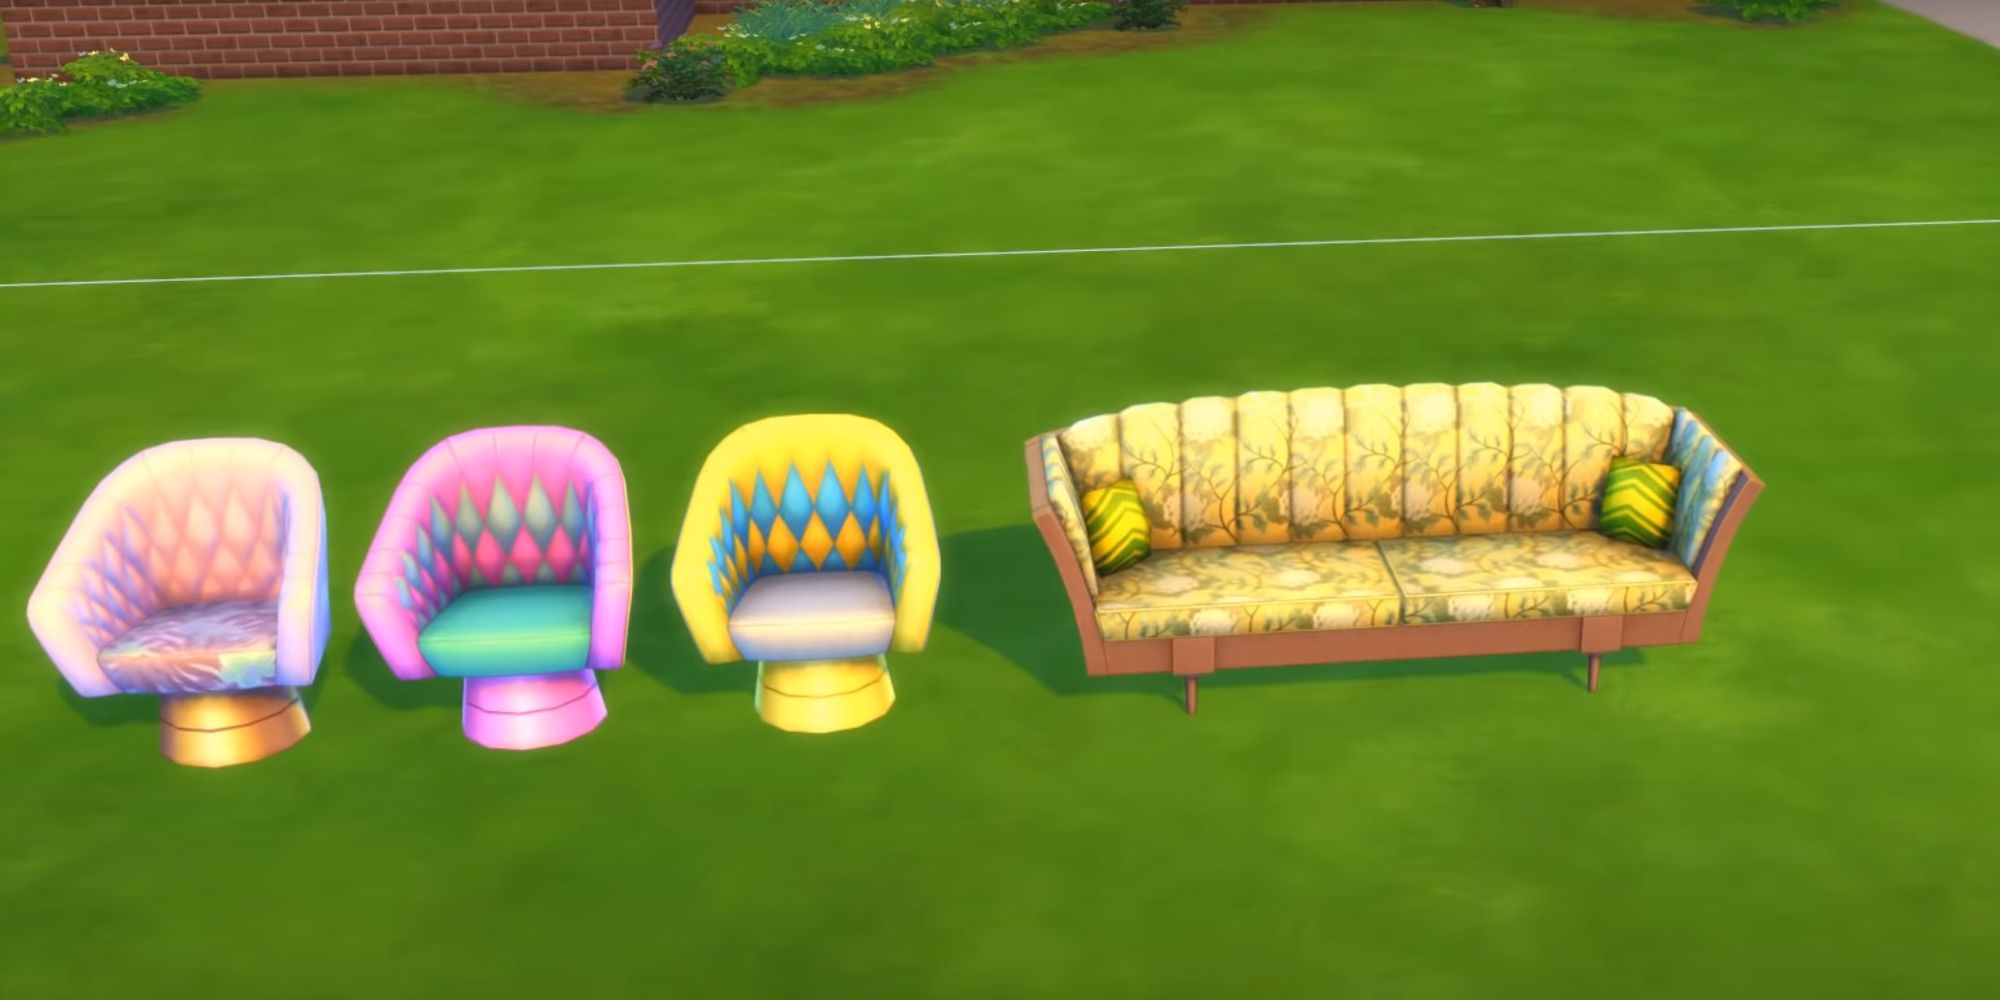 Sims 4 Decor To The Max Kit chair and sofa image.  This photo shows three chair samples and a yellow sofa version.